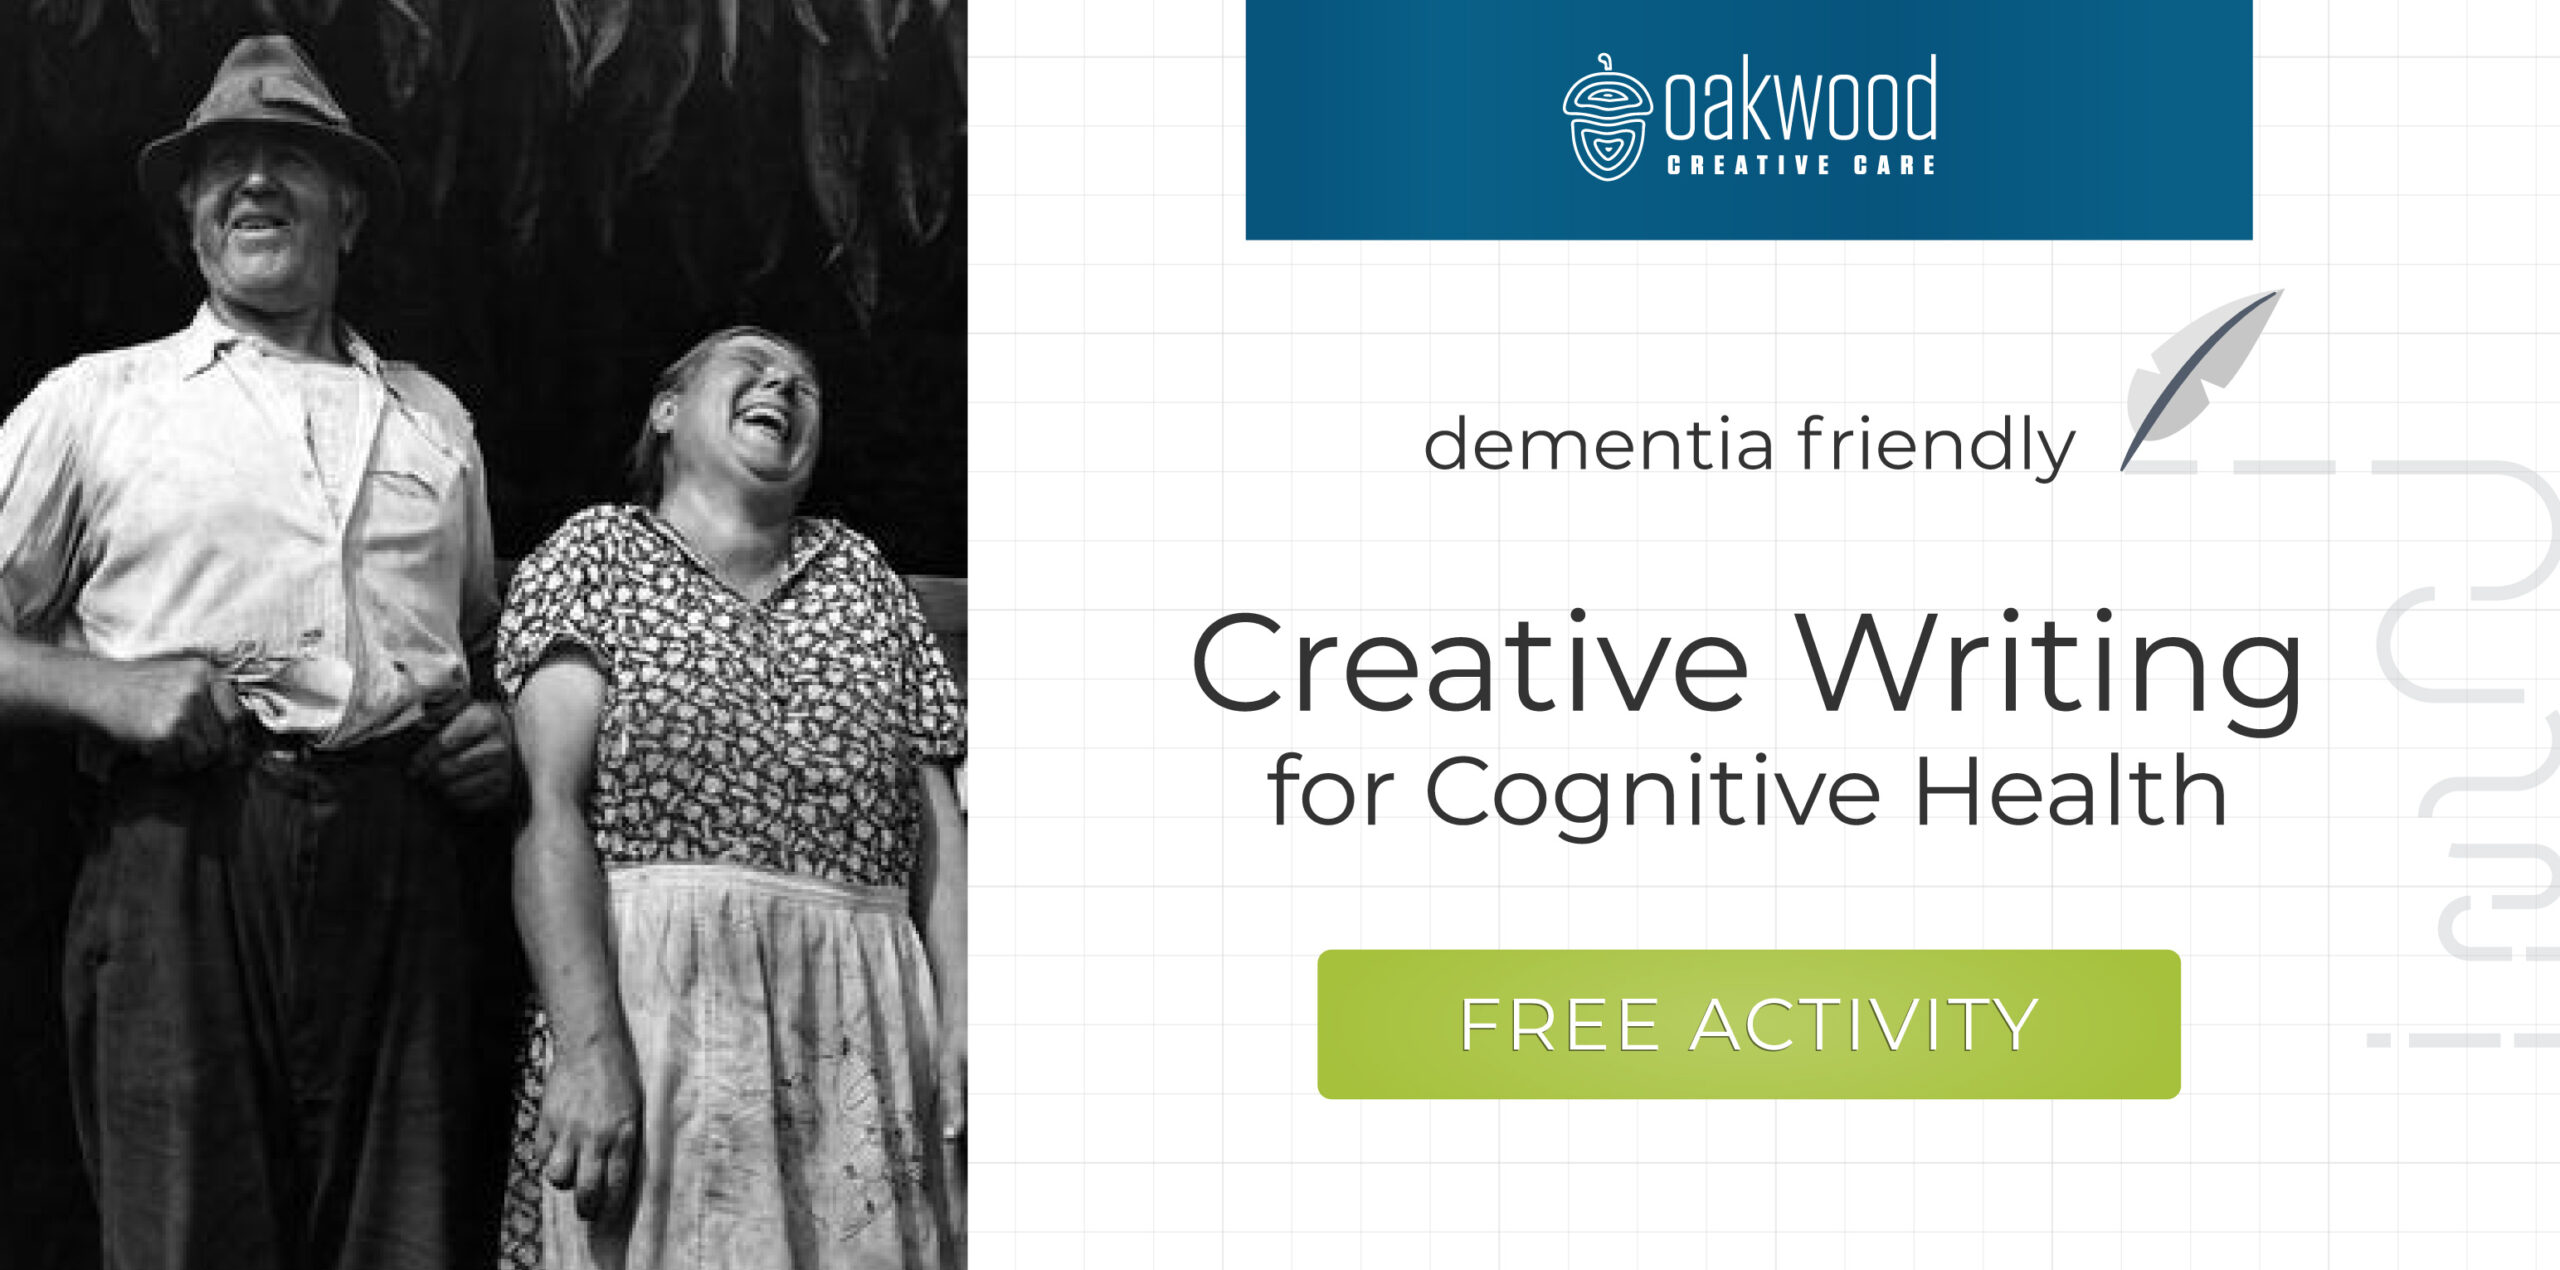 creative writing about dementia